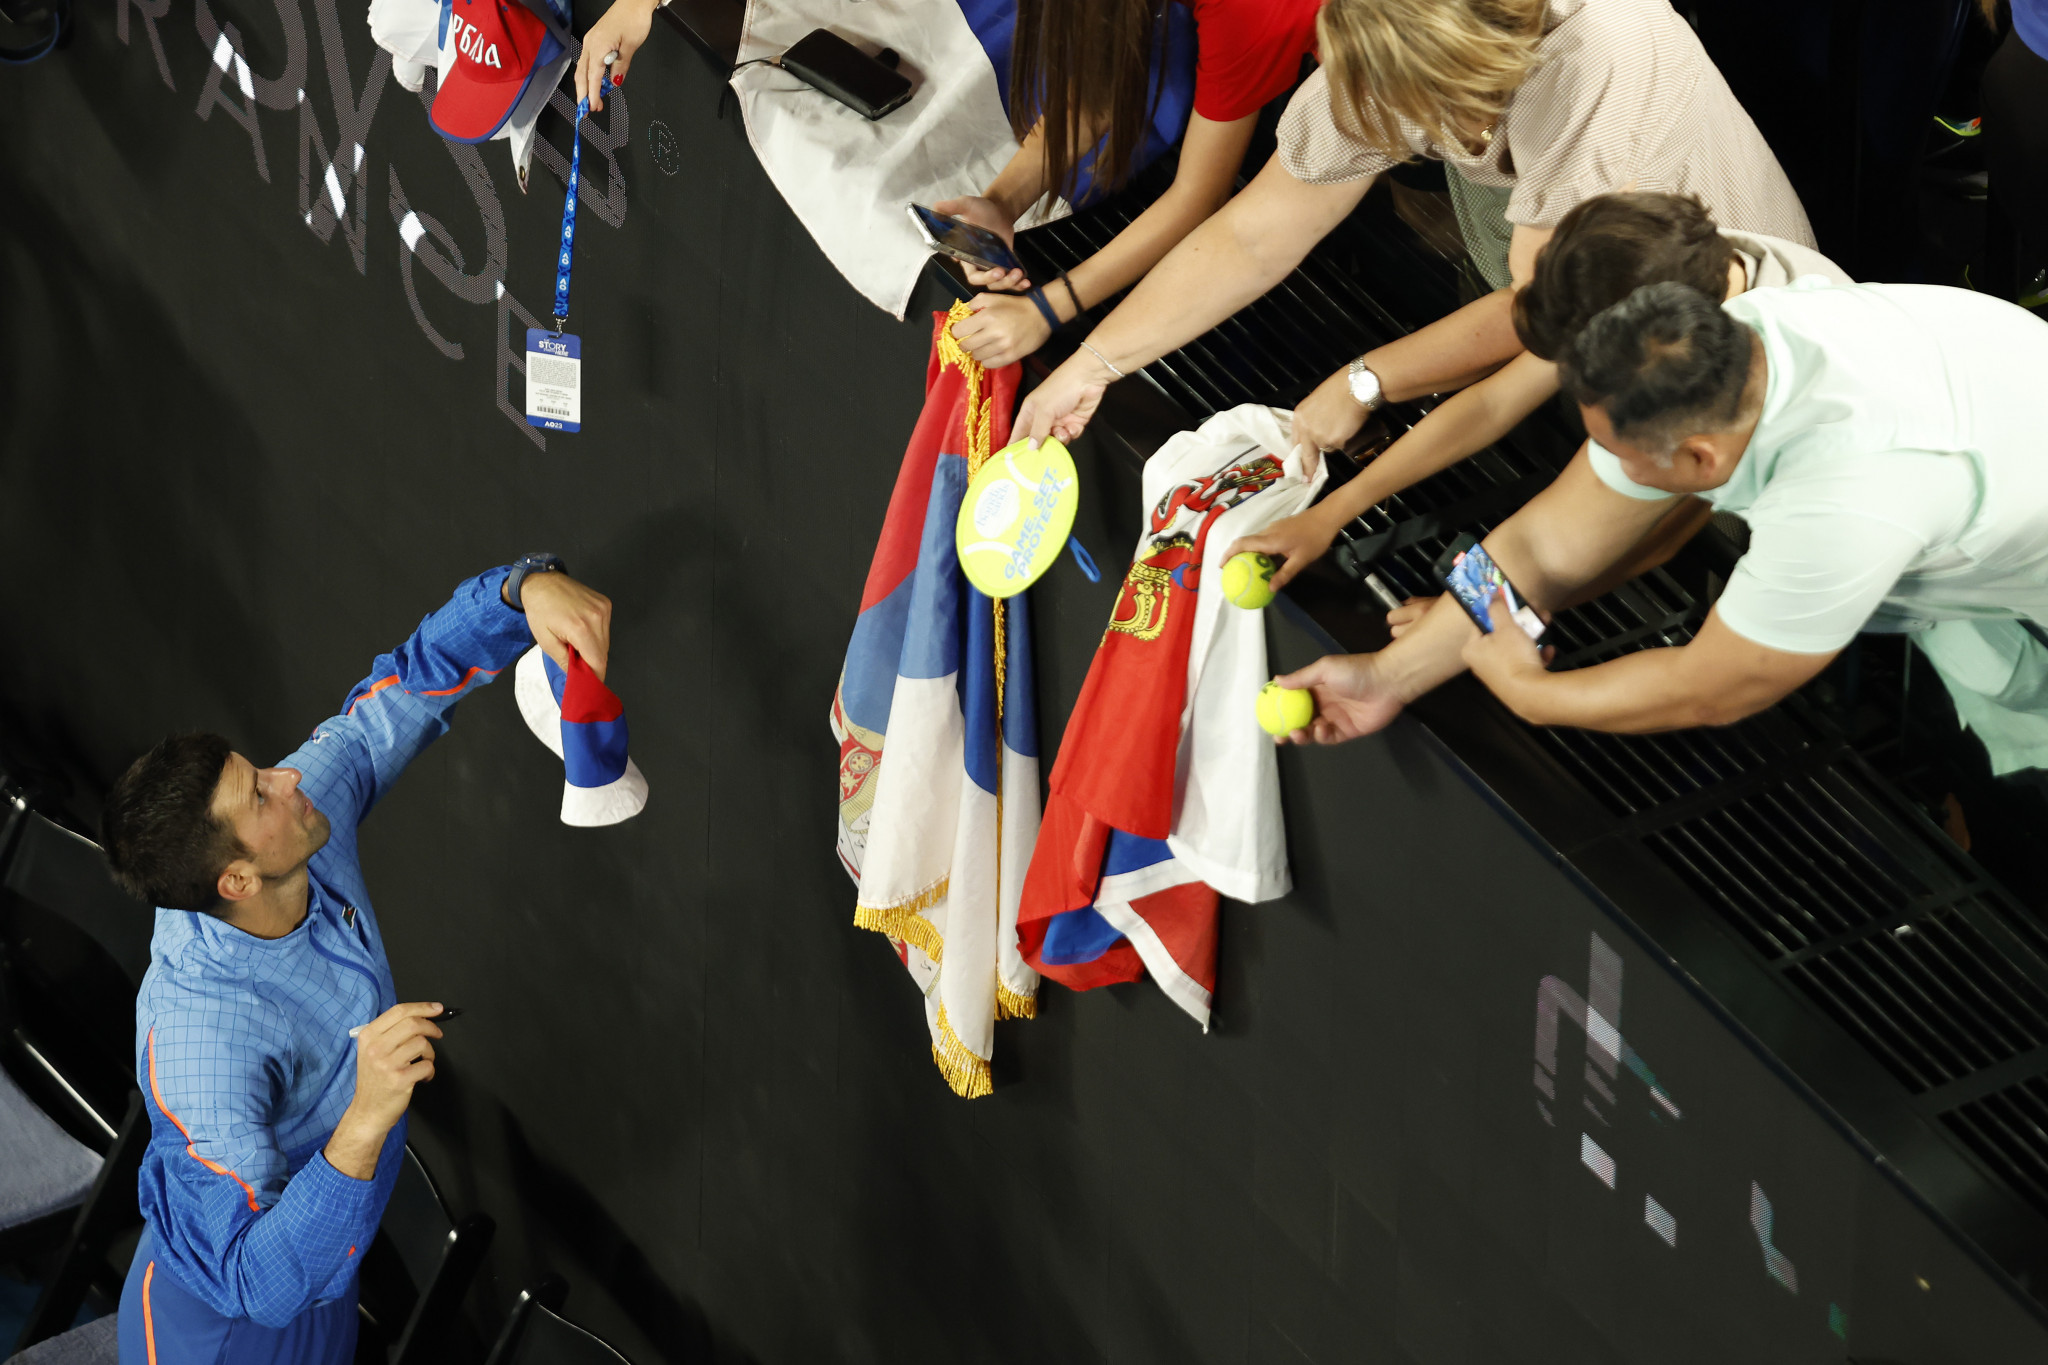 Novak Djokovic greets Serbian fans at the Australian Open in Melbourne ©Getty Images